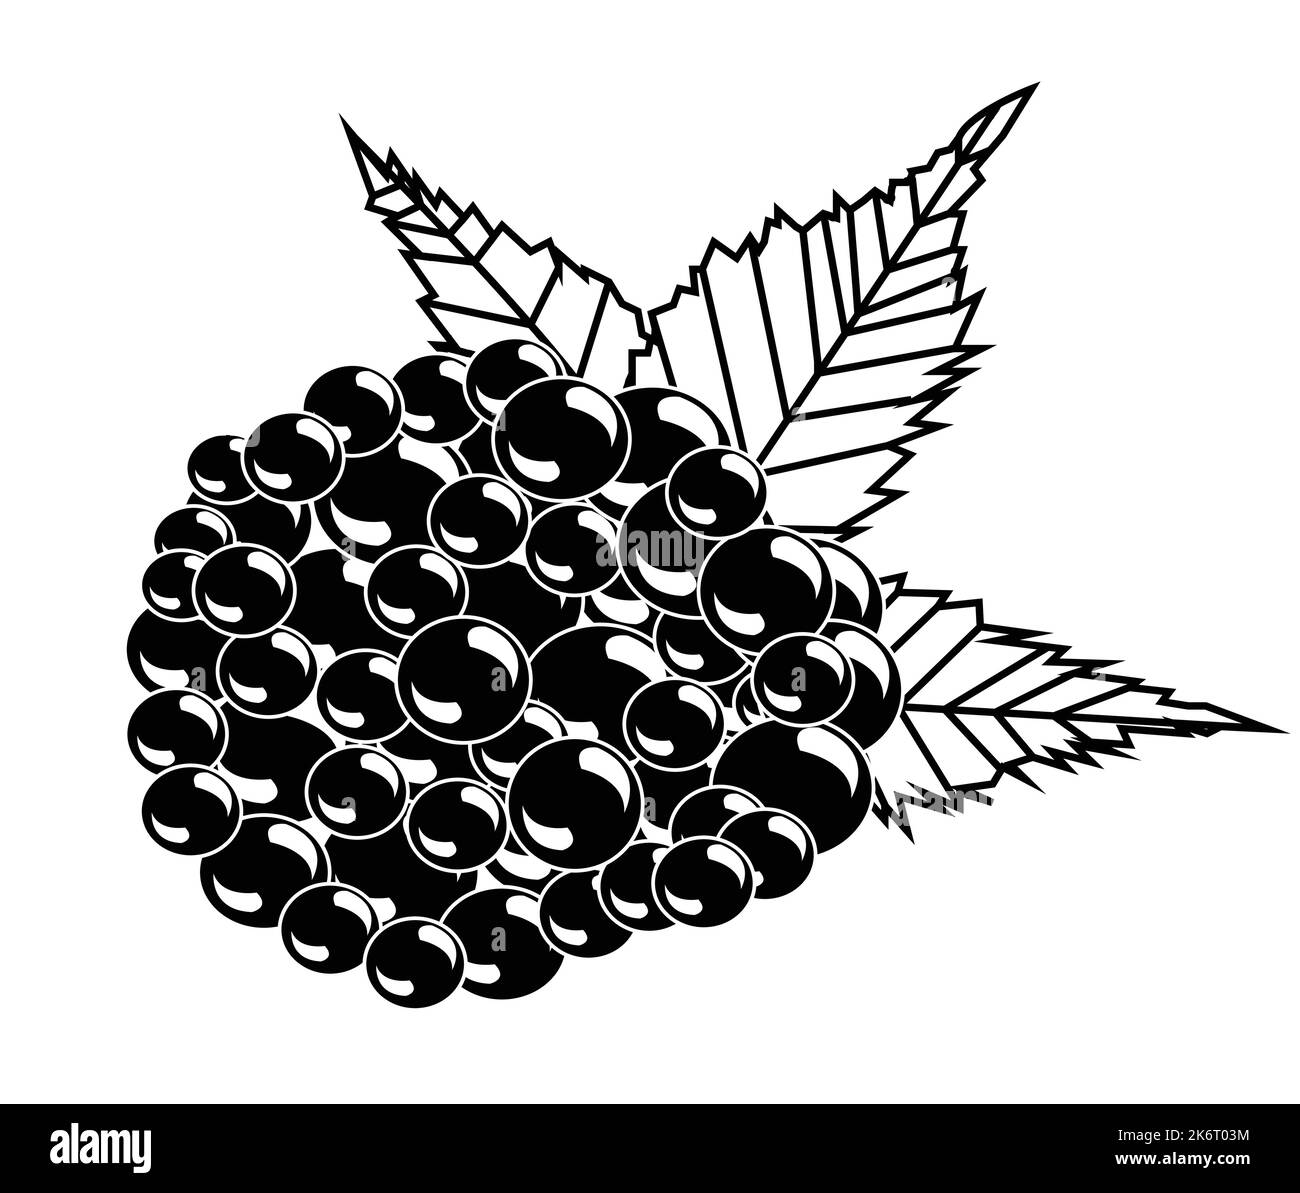 Black and white black berry design.Best graphic resources illustration. vector graphic design for icons and symbols and logo designing and stationery Stock Vector